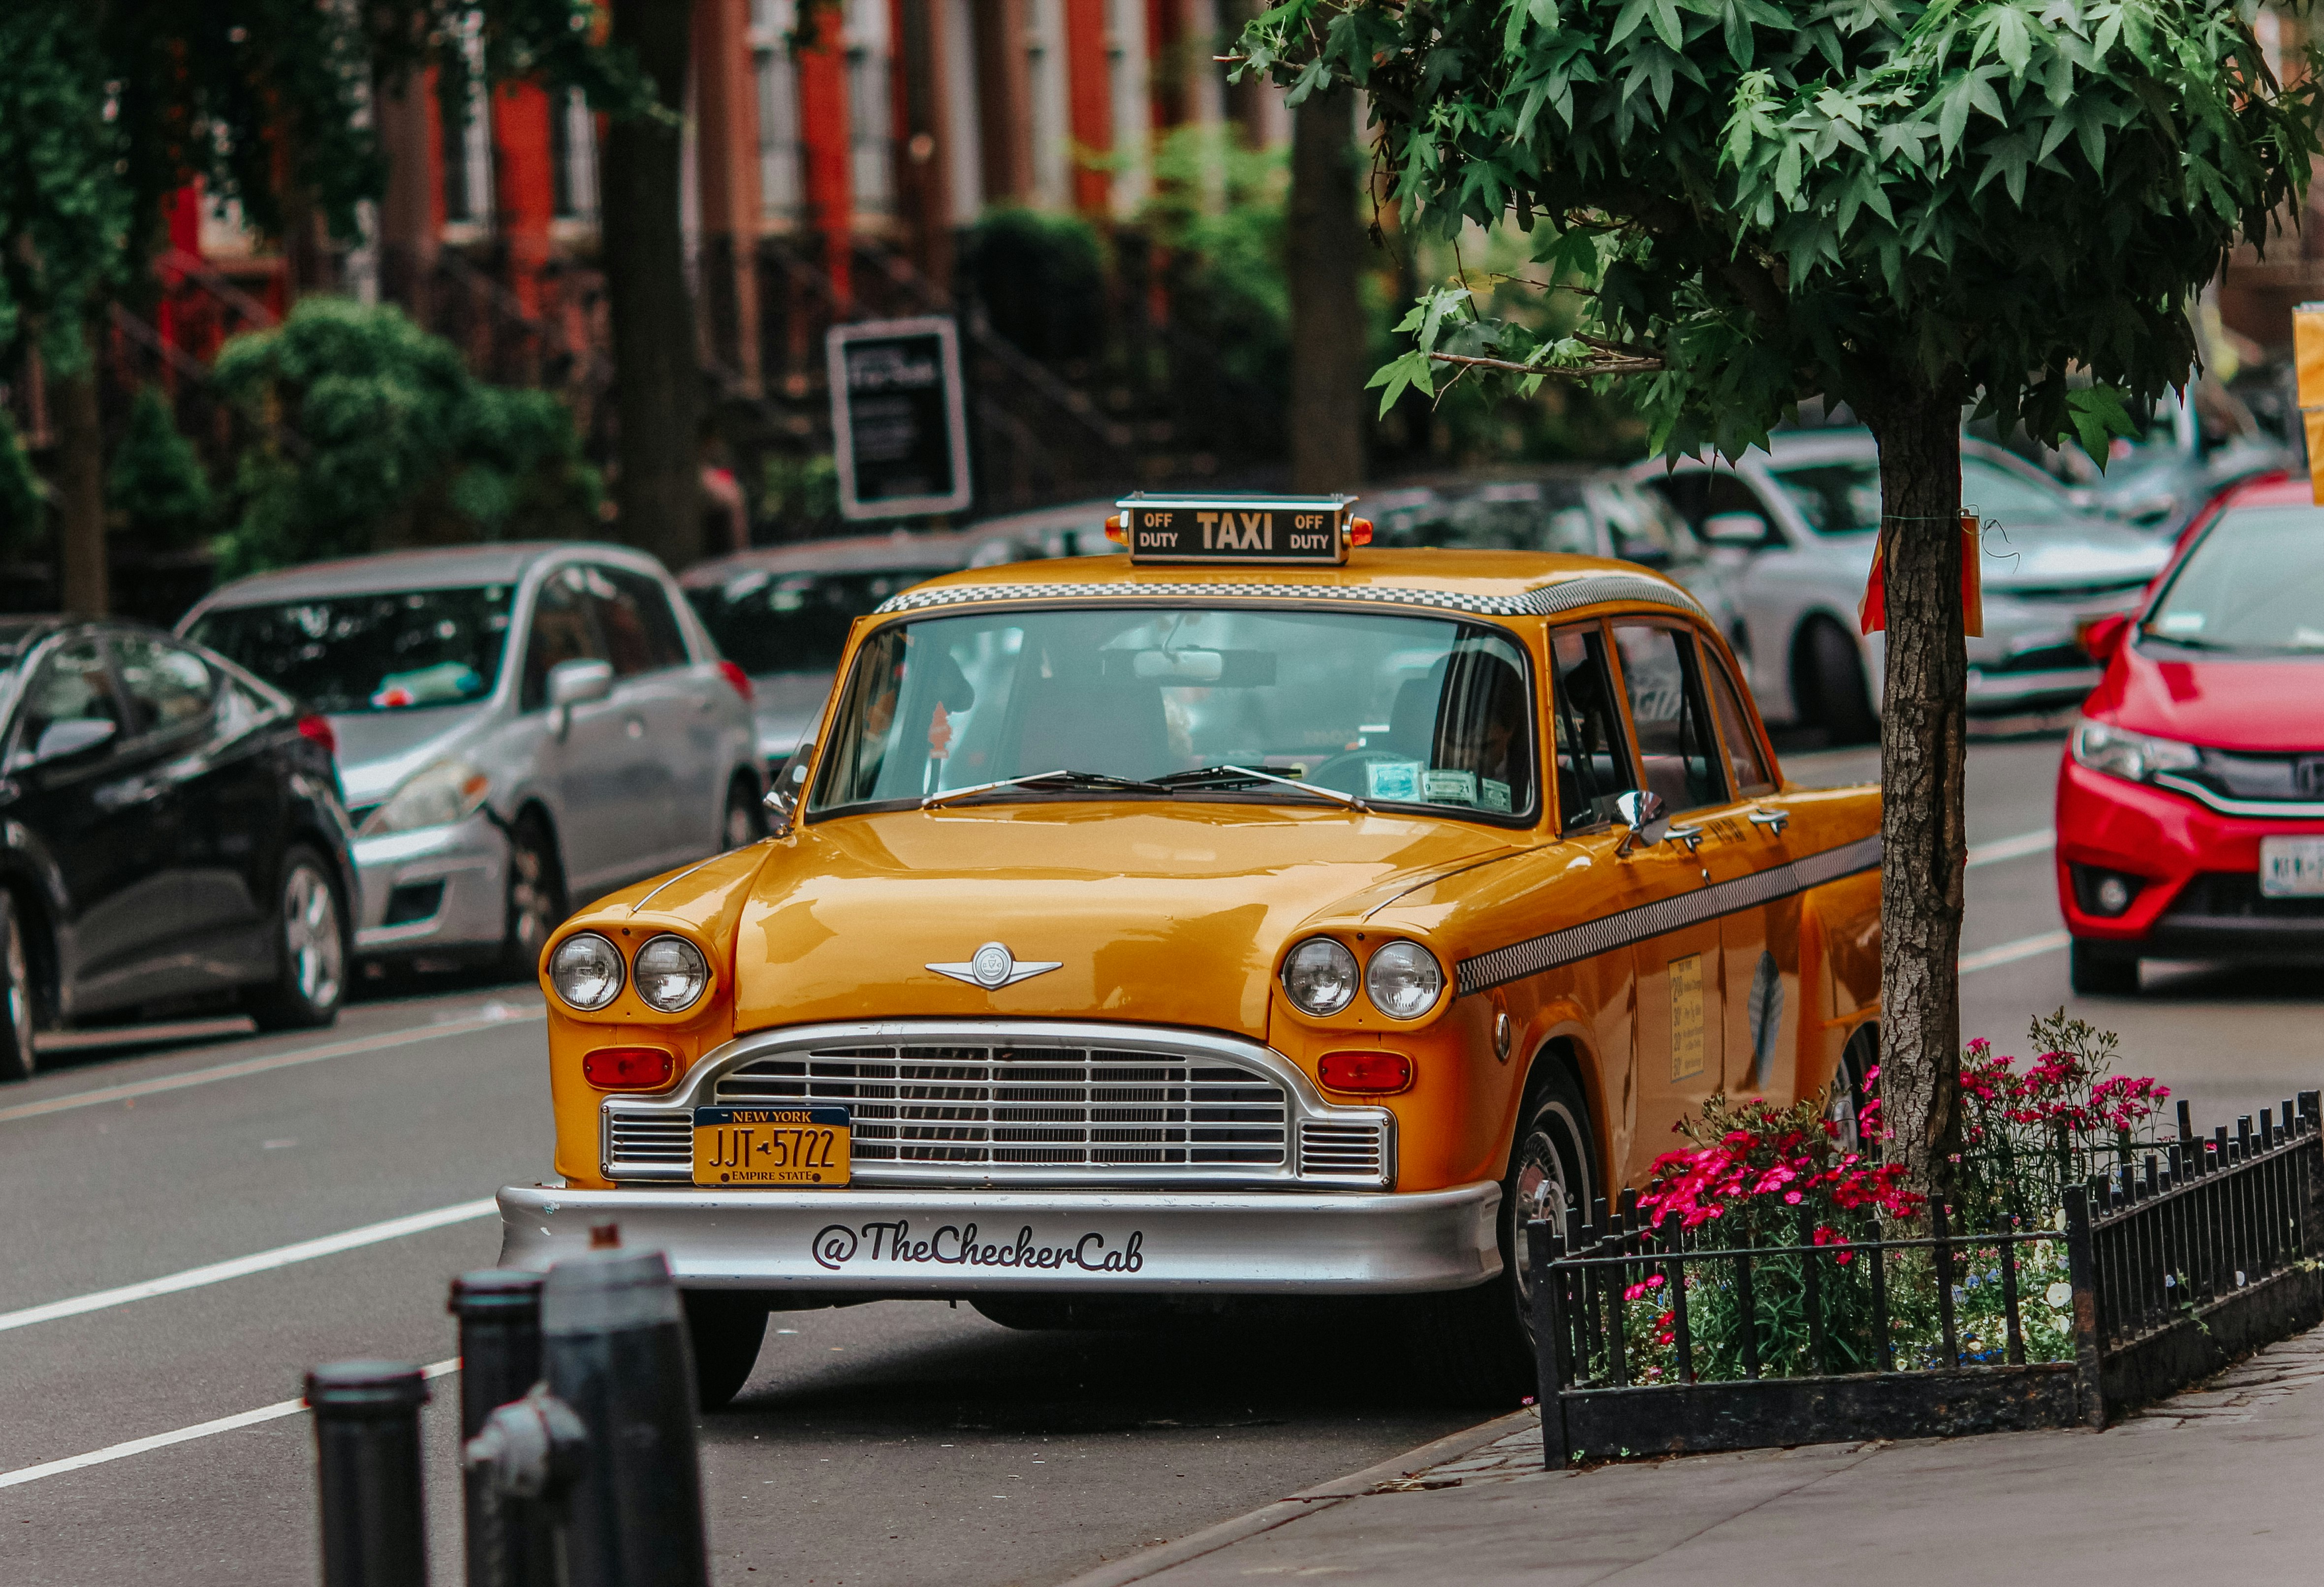 yellow taxi cab on the street during daytime